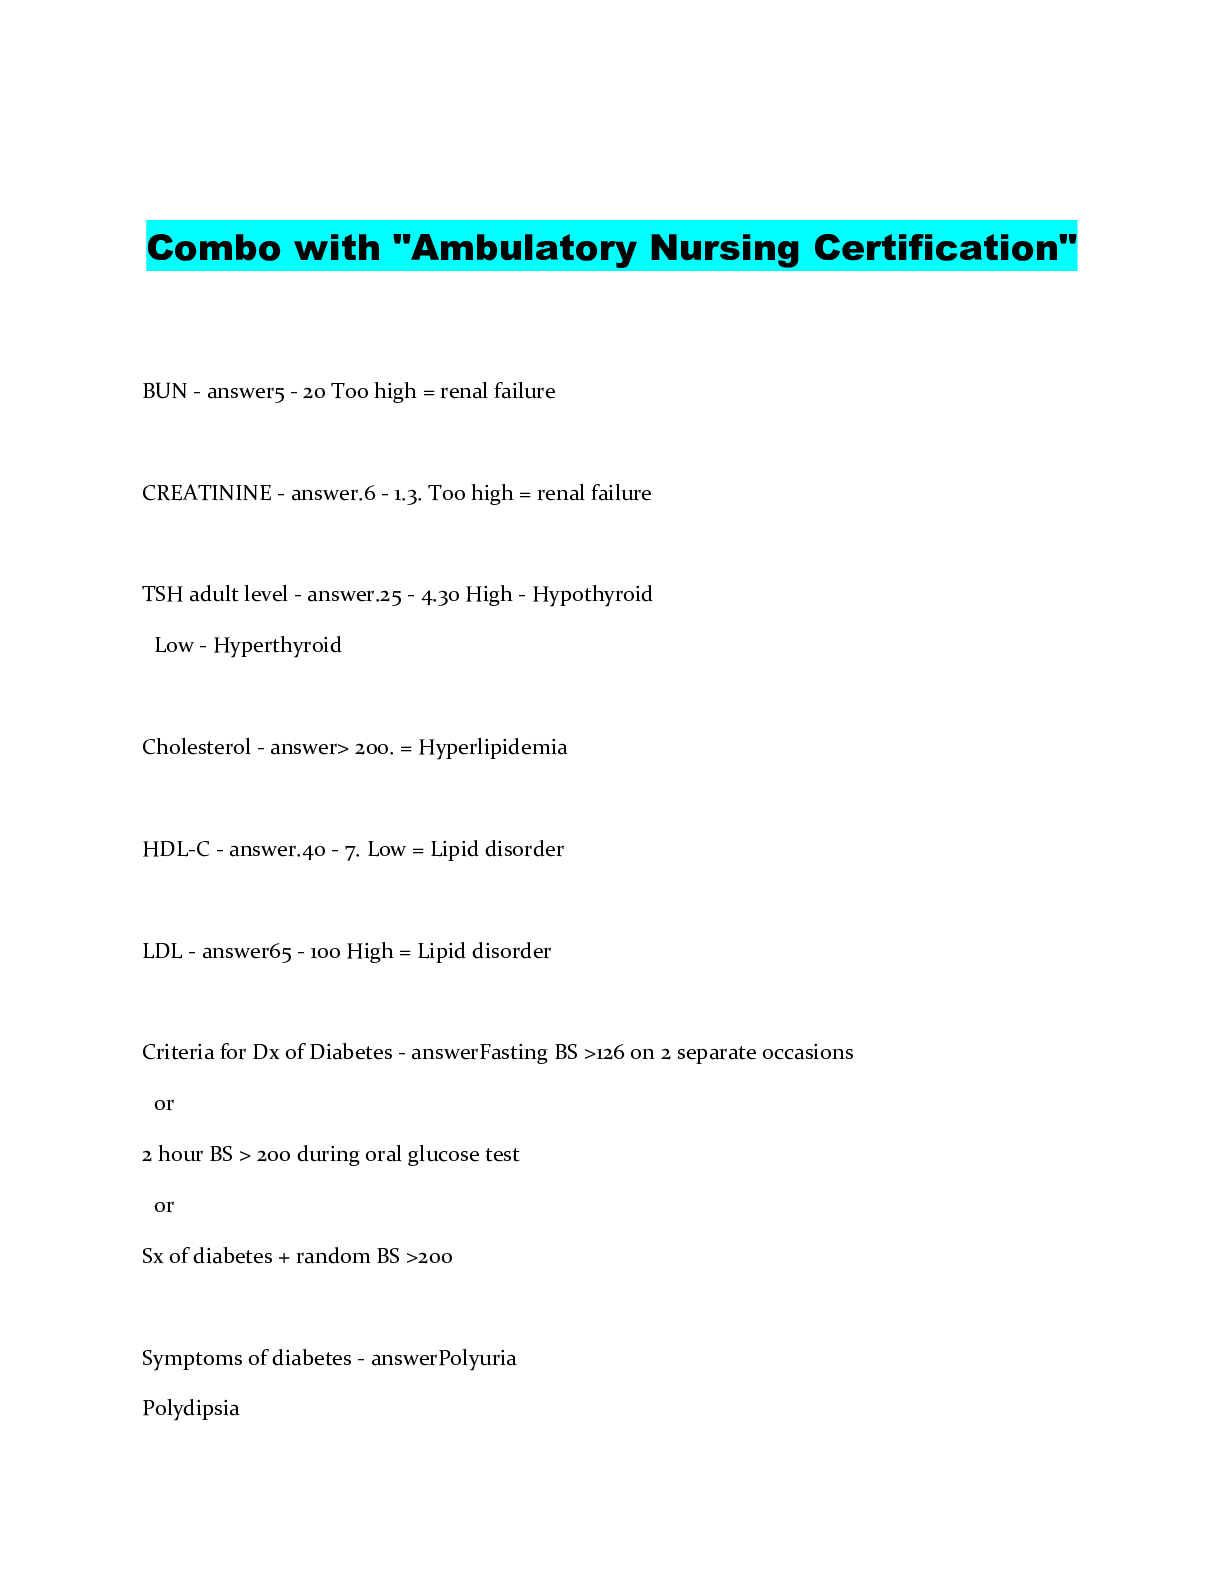 AMBULATORY NURSE CERTIFICATION COMPLETE QUESTIONS AND ANSWERS GRADED A 